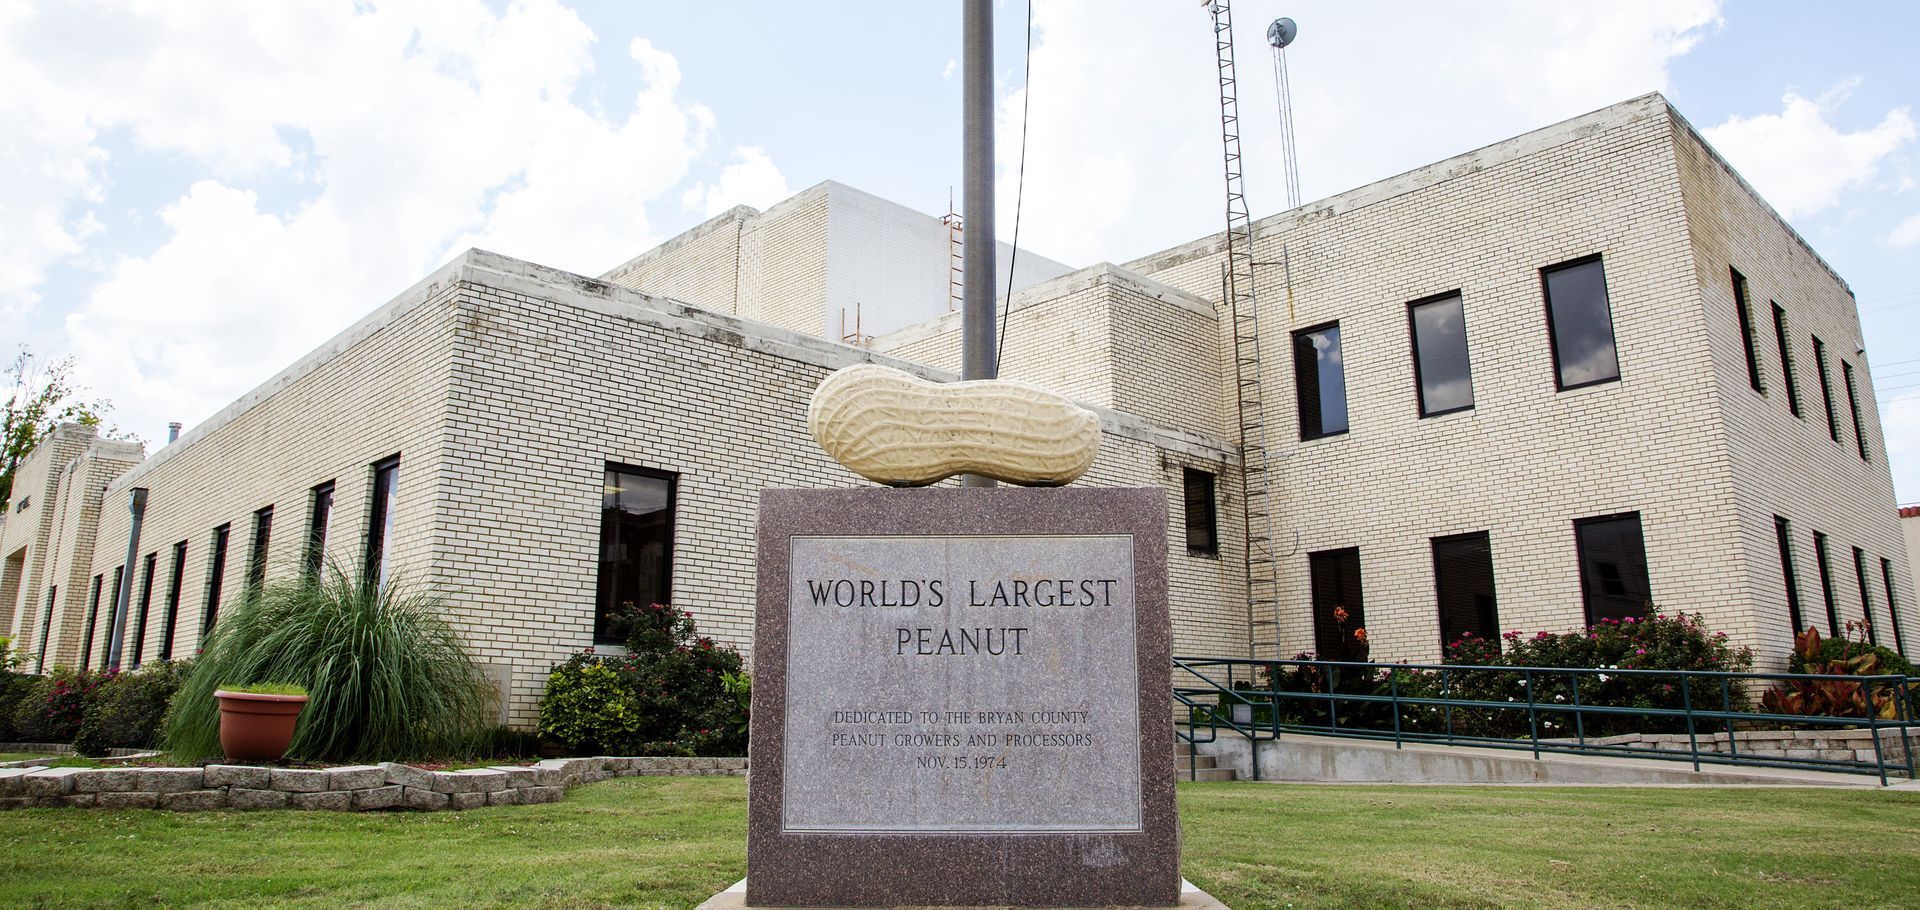  World's Largest Peanut Sculpture: world record in Durant, Oklahoma